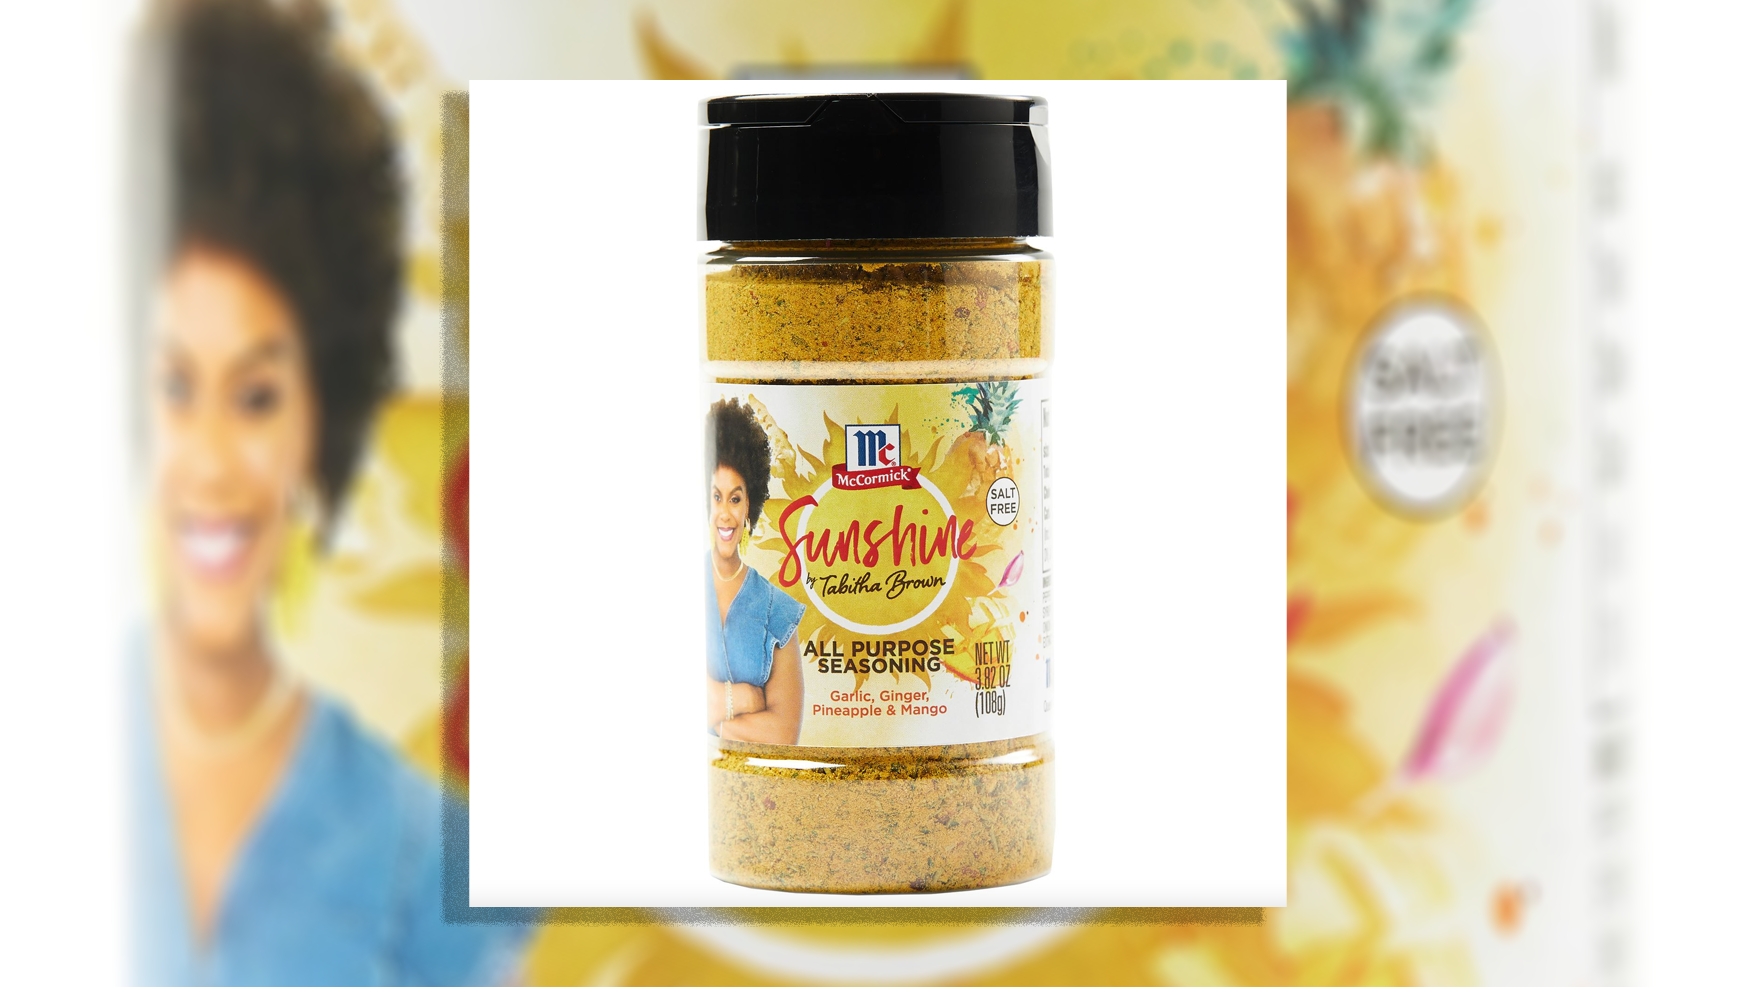 Tabitha Brown's Sold-Out McCormick Sunshine Seasoning is Coming to